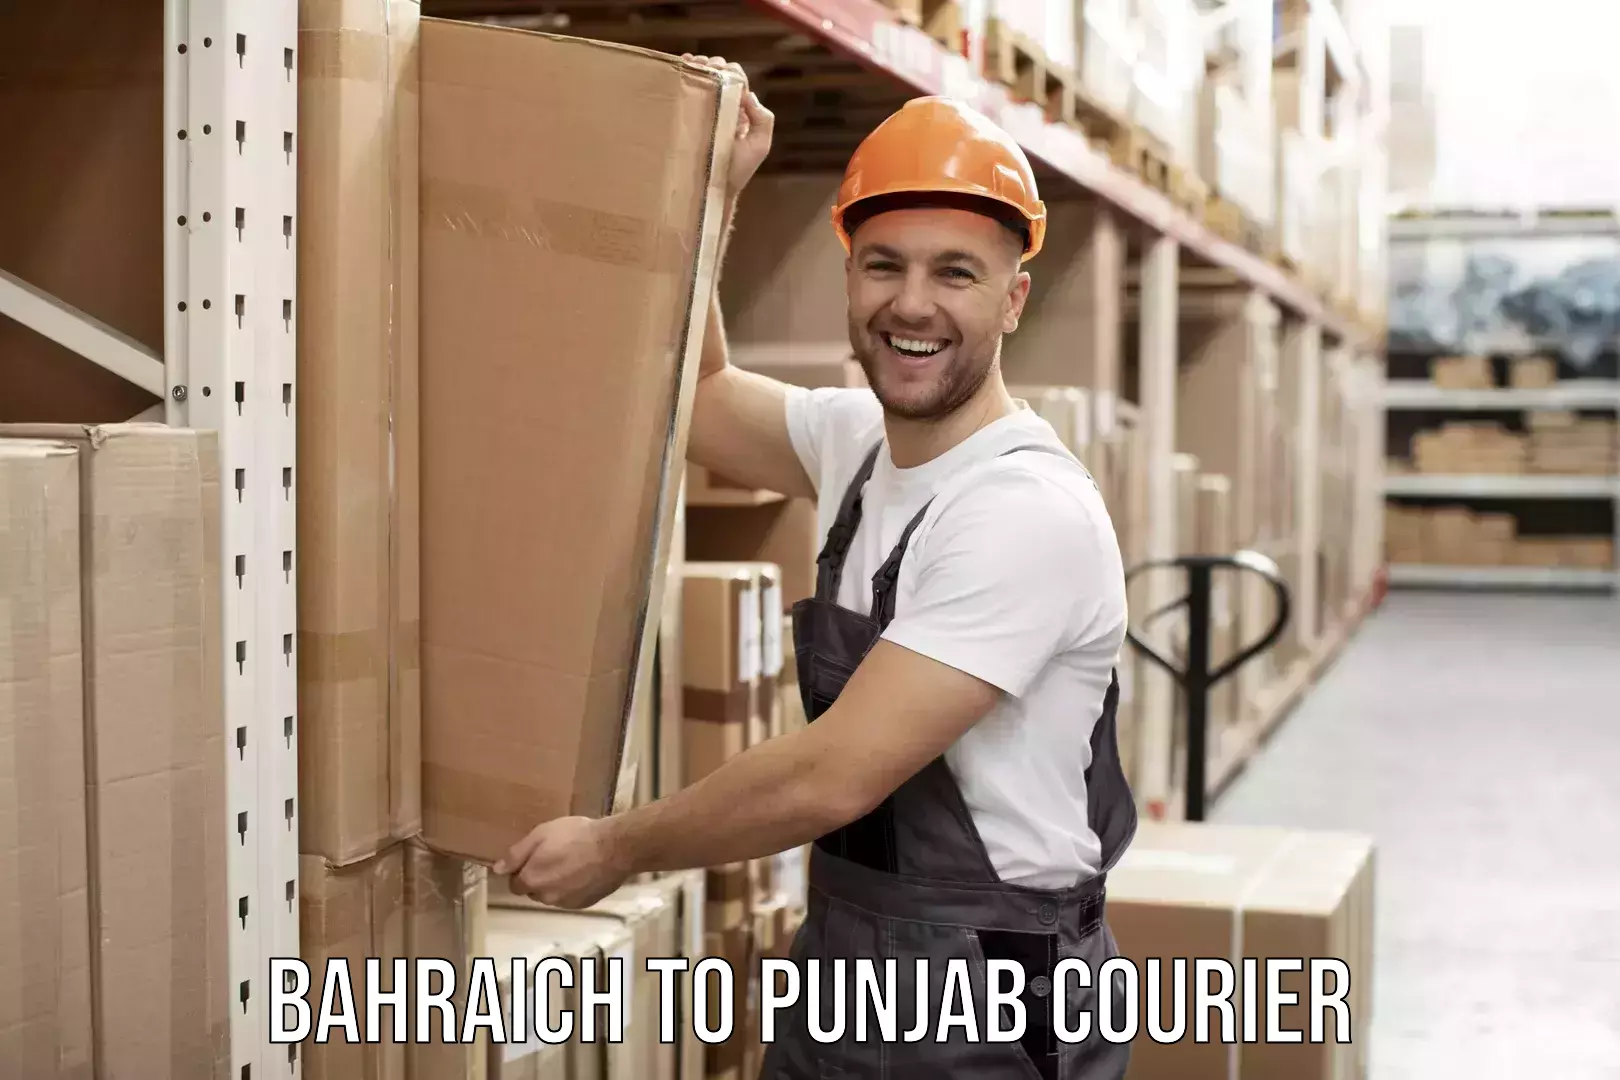 Residential moving experts Bahraich to Punjab